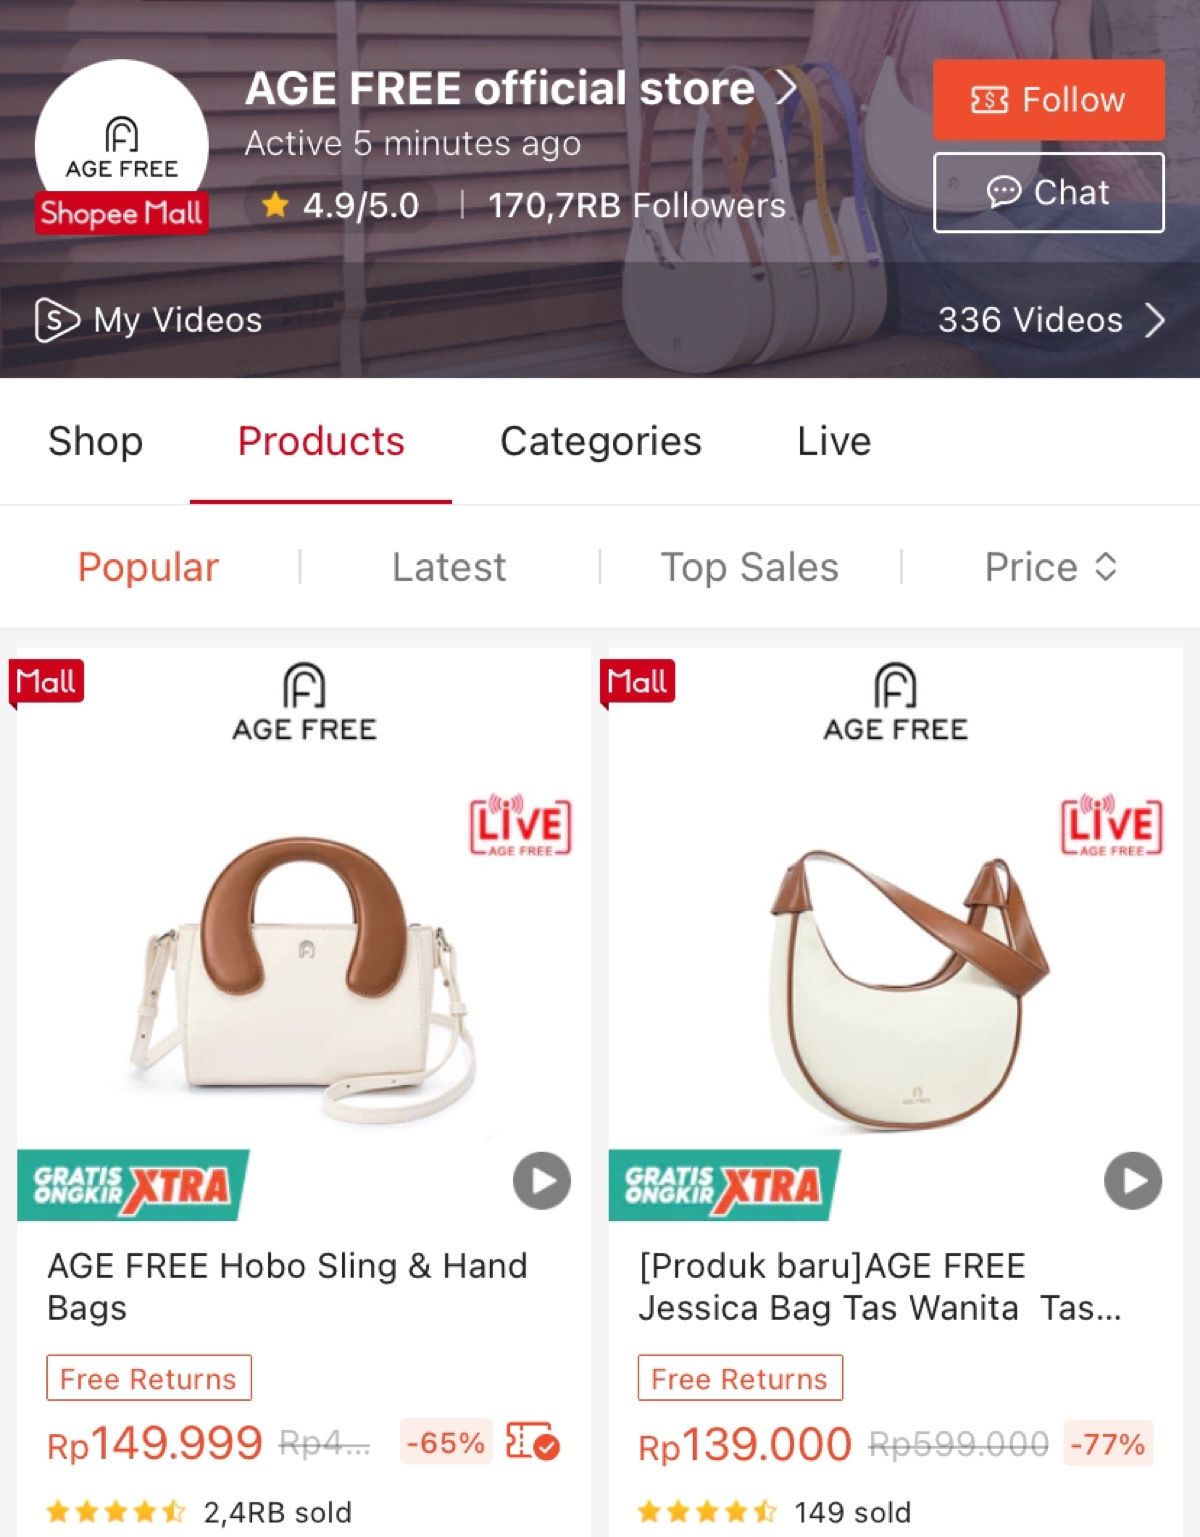 Age Free Official Store di Shopee Mall